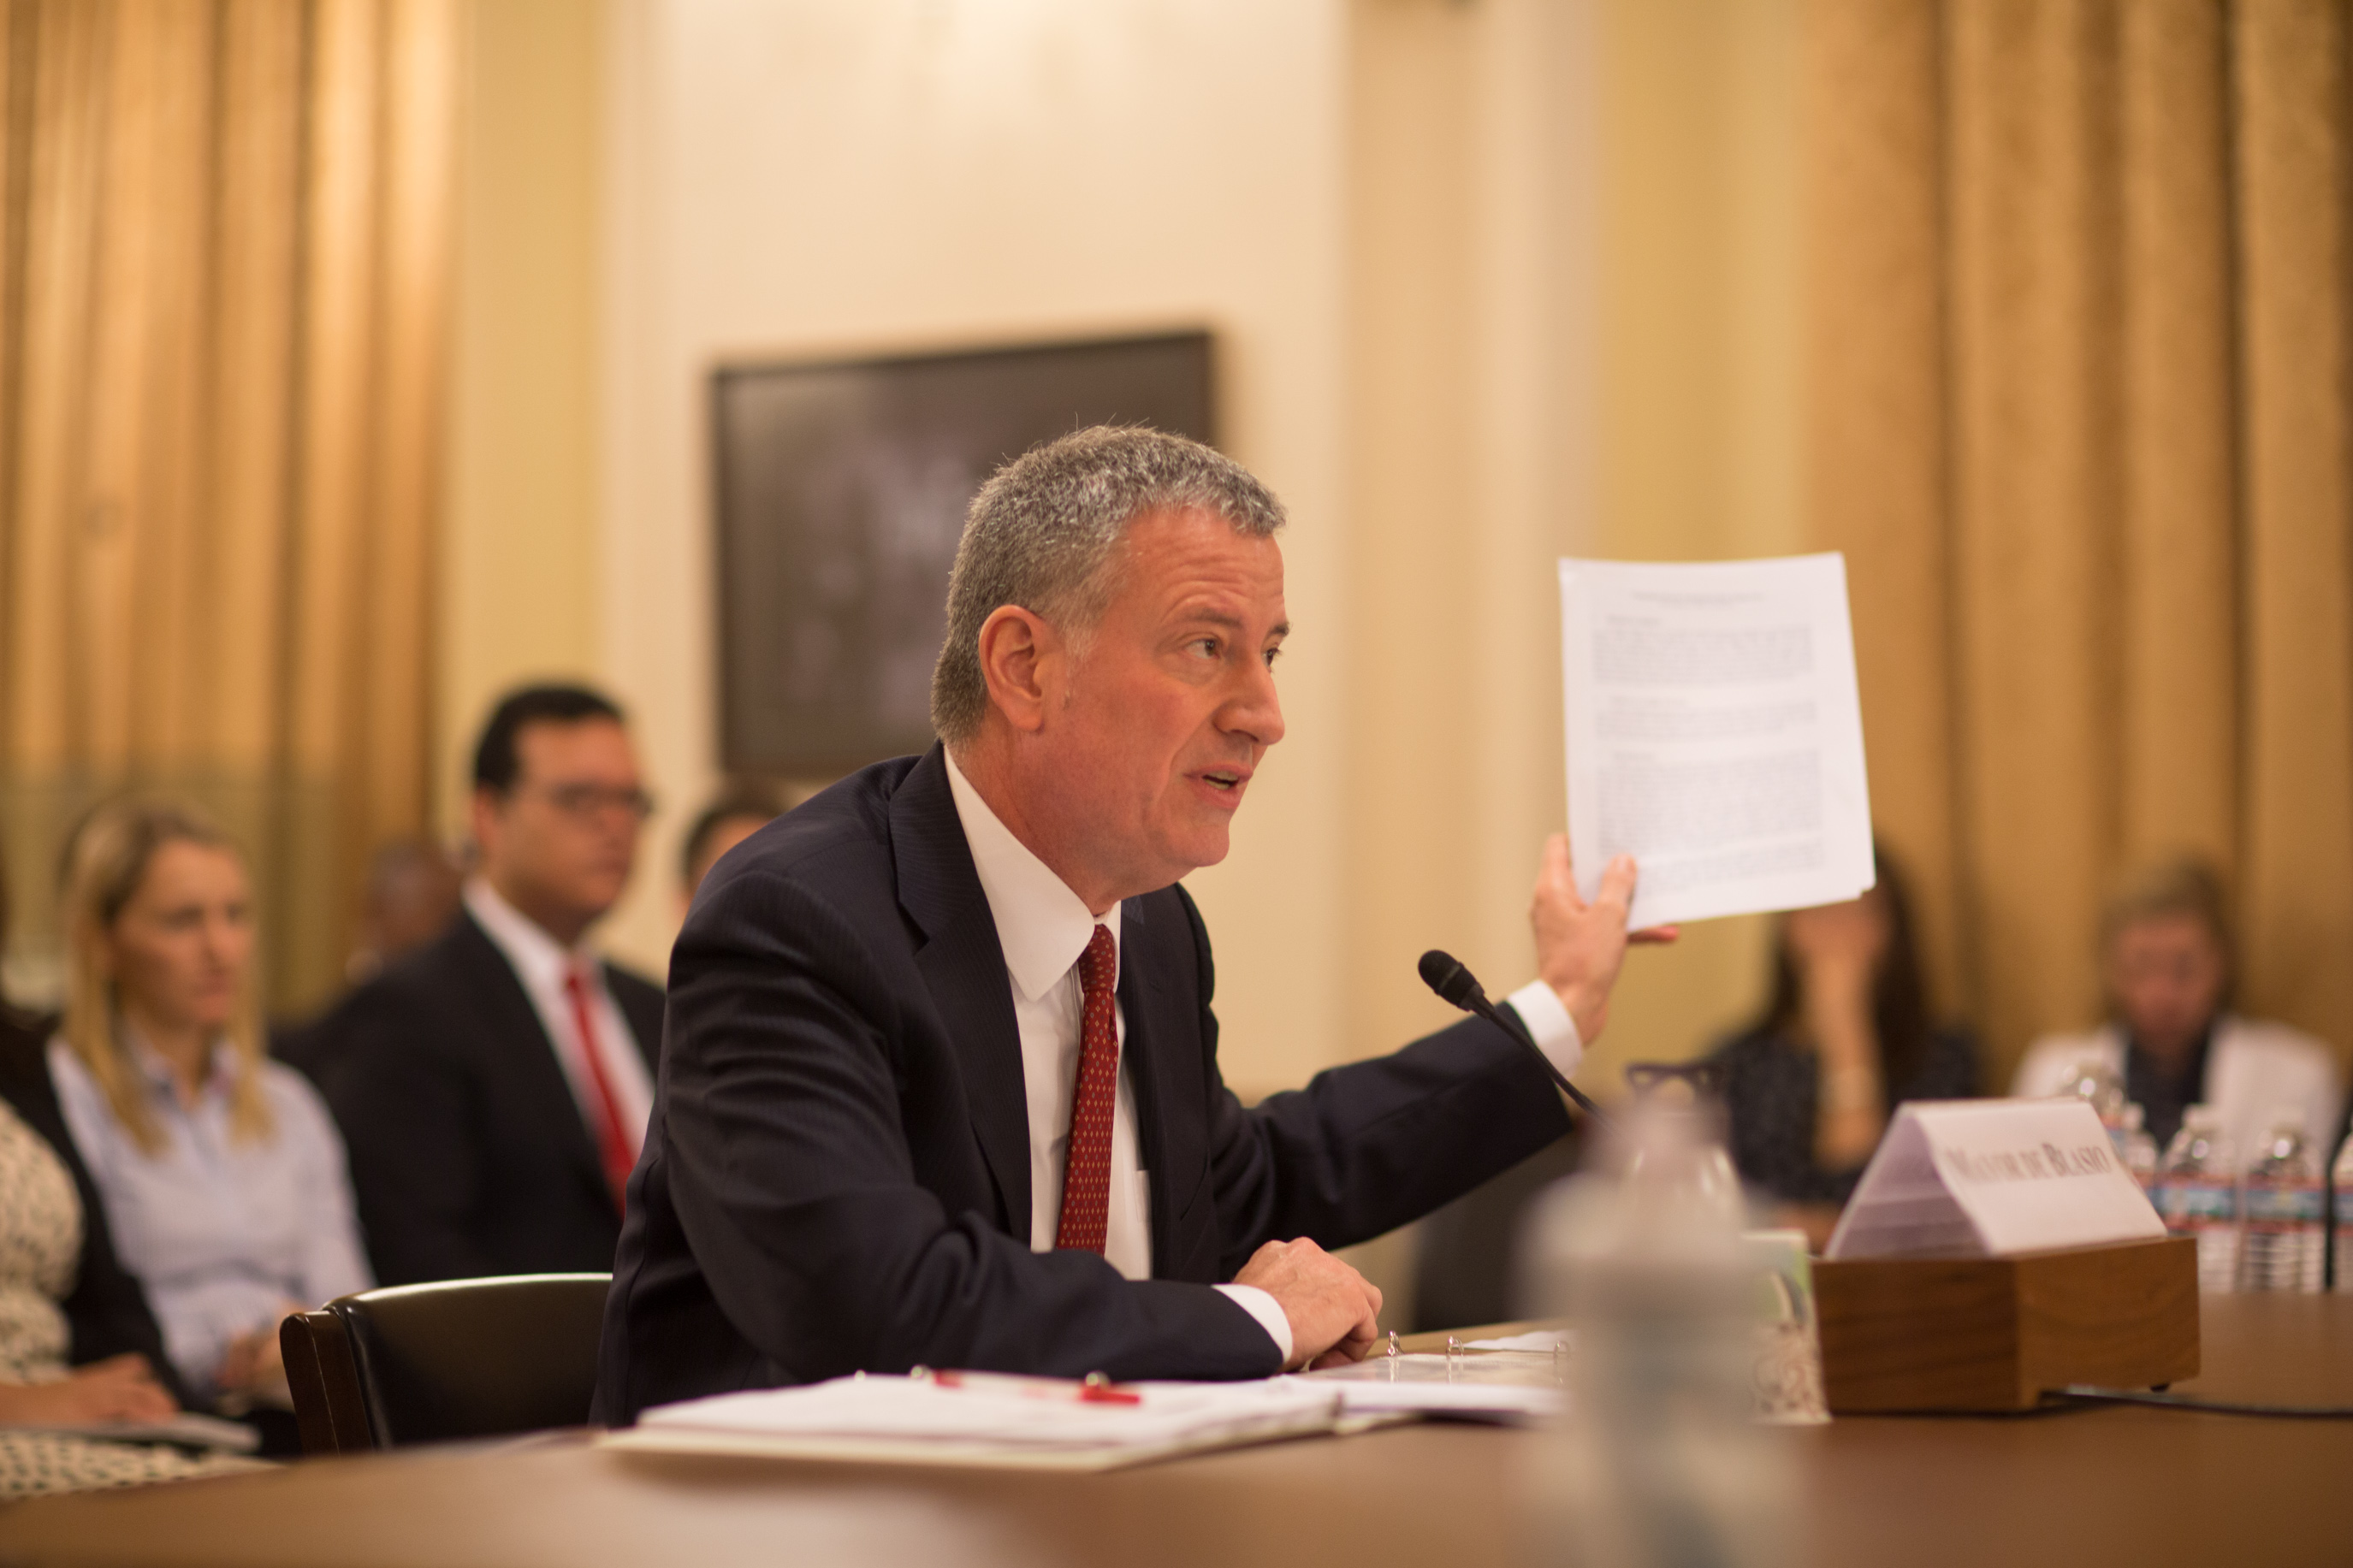 Mayor Bill de Blasio testifies before the House Homeland Security Emergency Preparedness Subcommittee in Washington, D.C. on Tuesday, March 15, 2016.